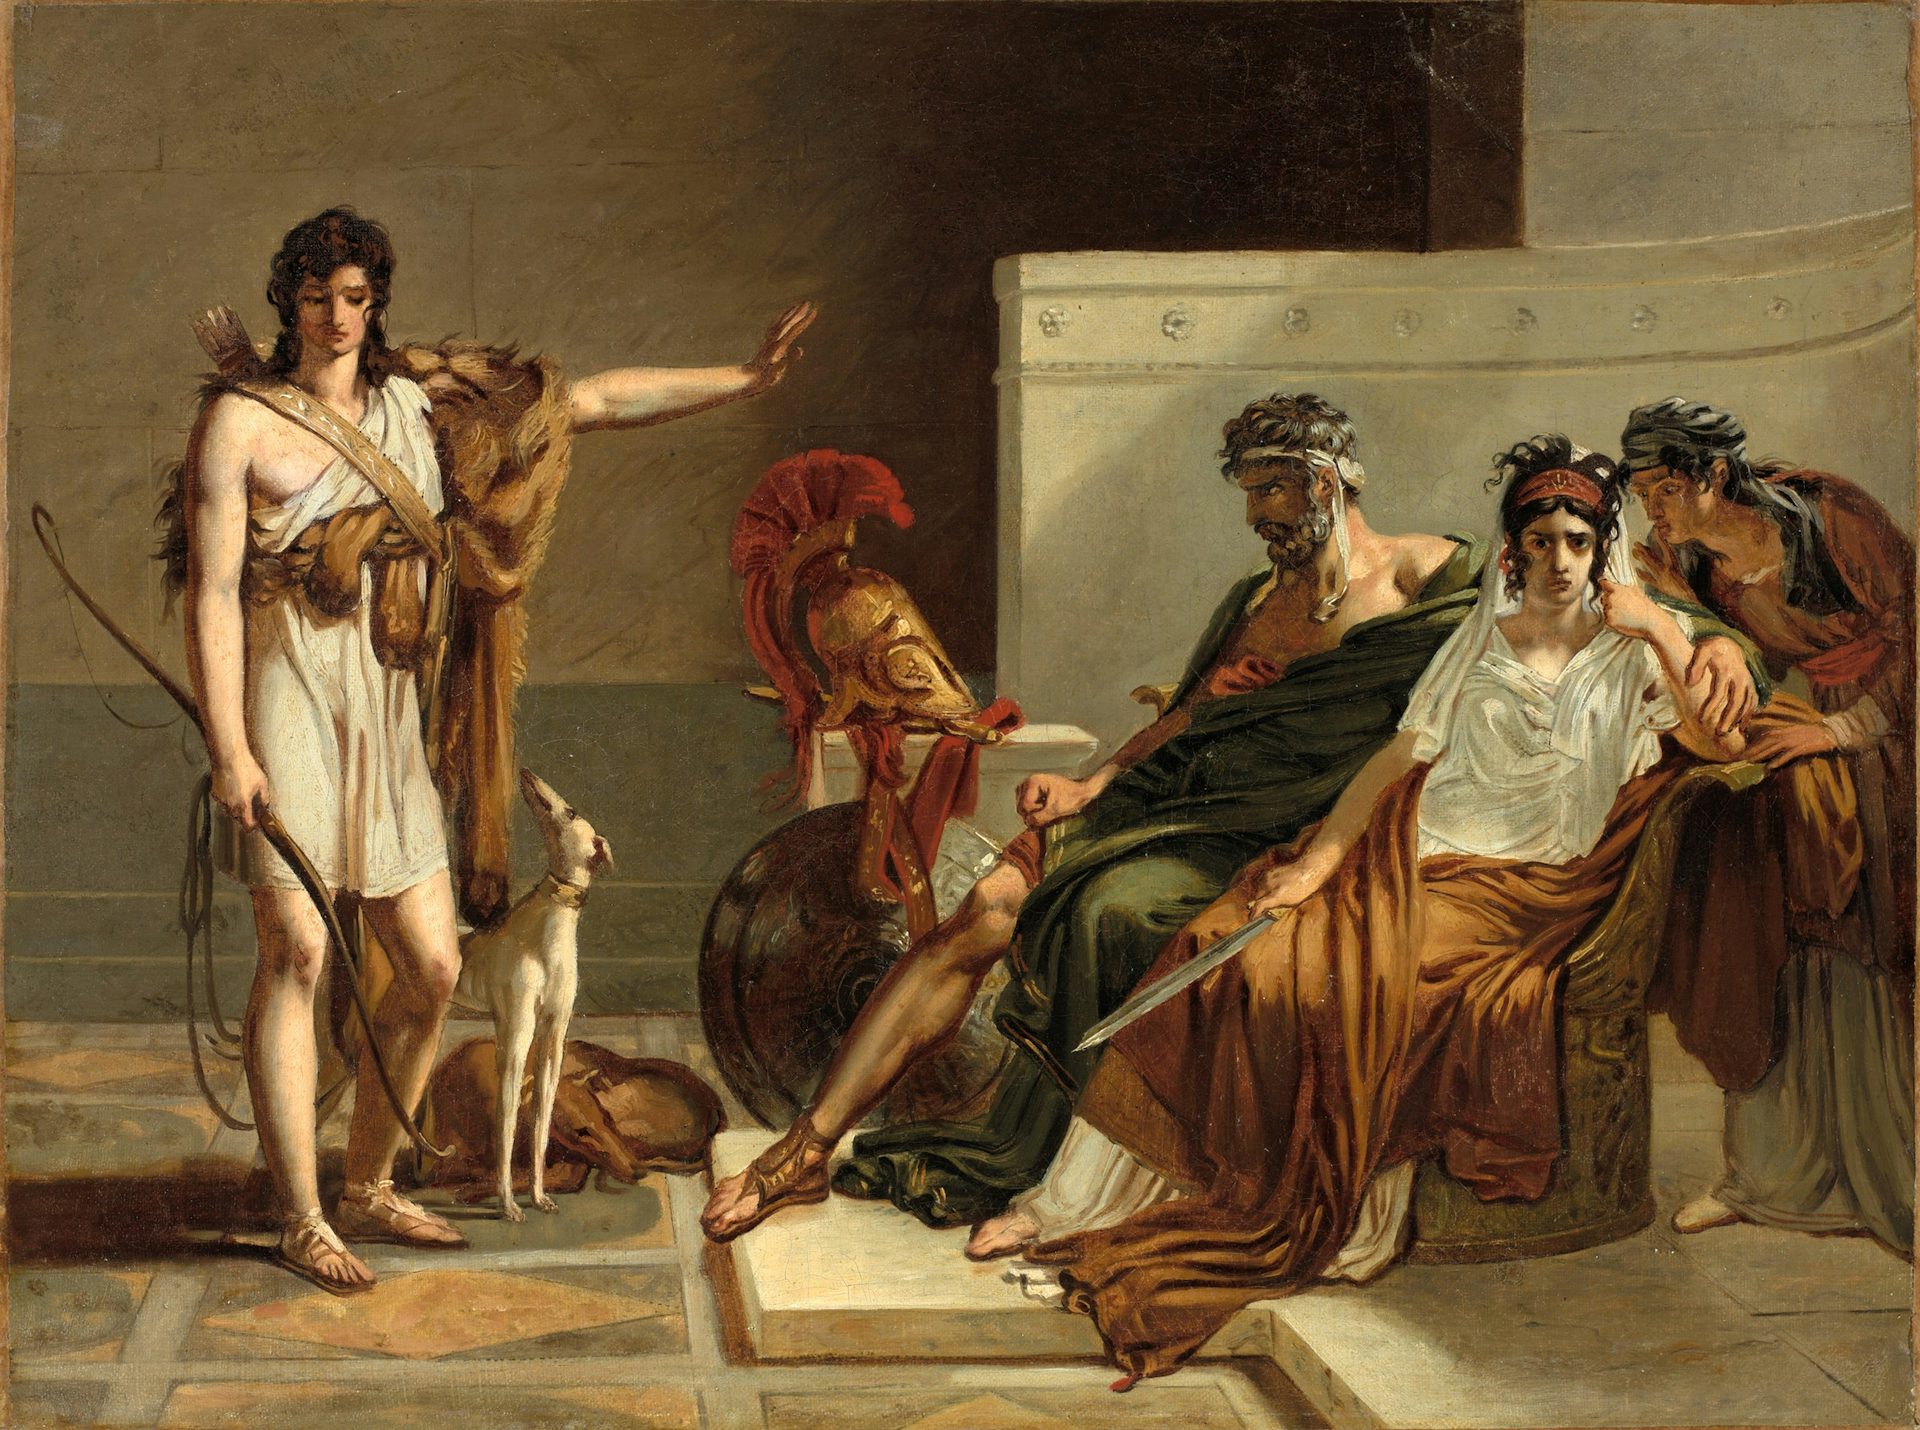 Phaedra and Hippolytus by Pierre-Narcisse Guérin